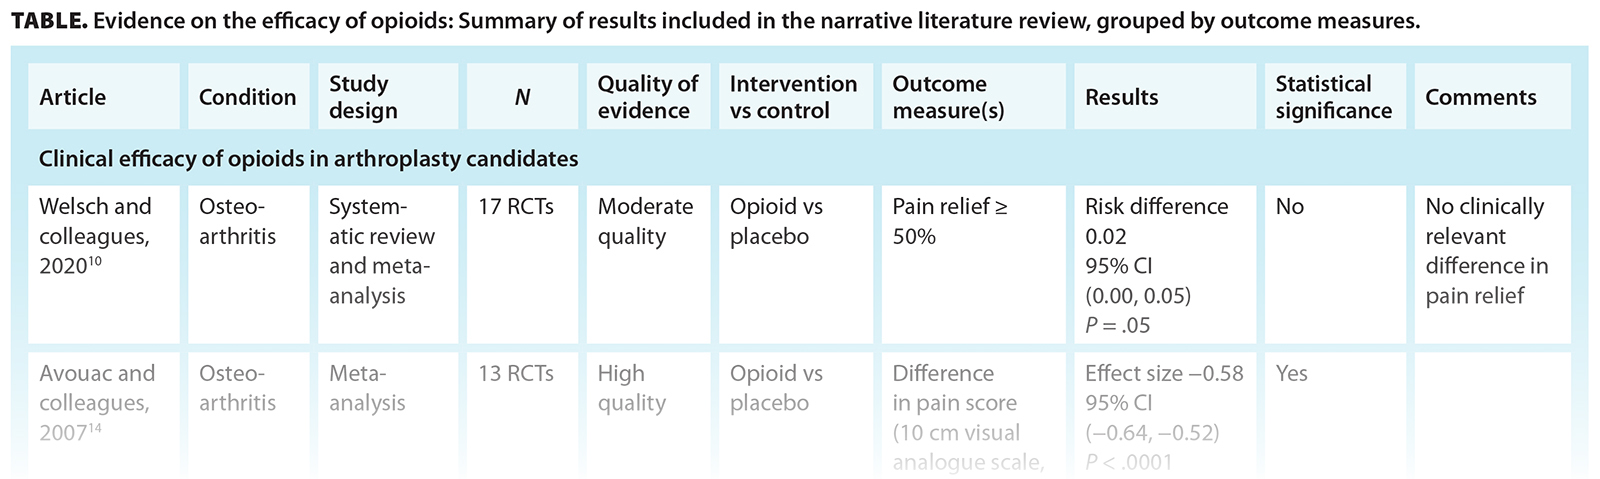 TABLE. Evidence on the efficacy of opioids: Summary of results included in the narrative literature review, grouped by outcome measures.